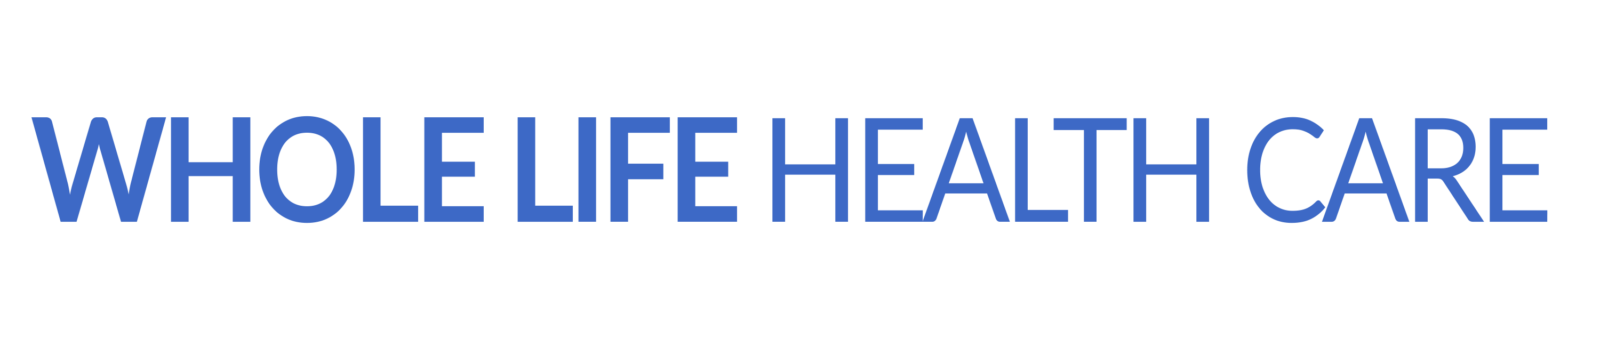 Whole Life Healthcare Solutions